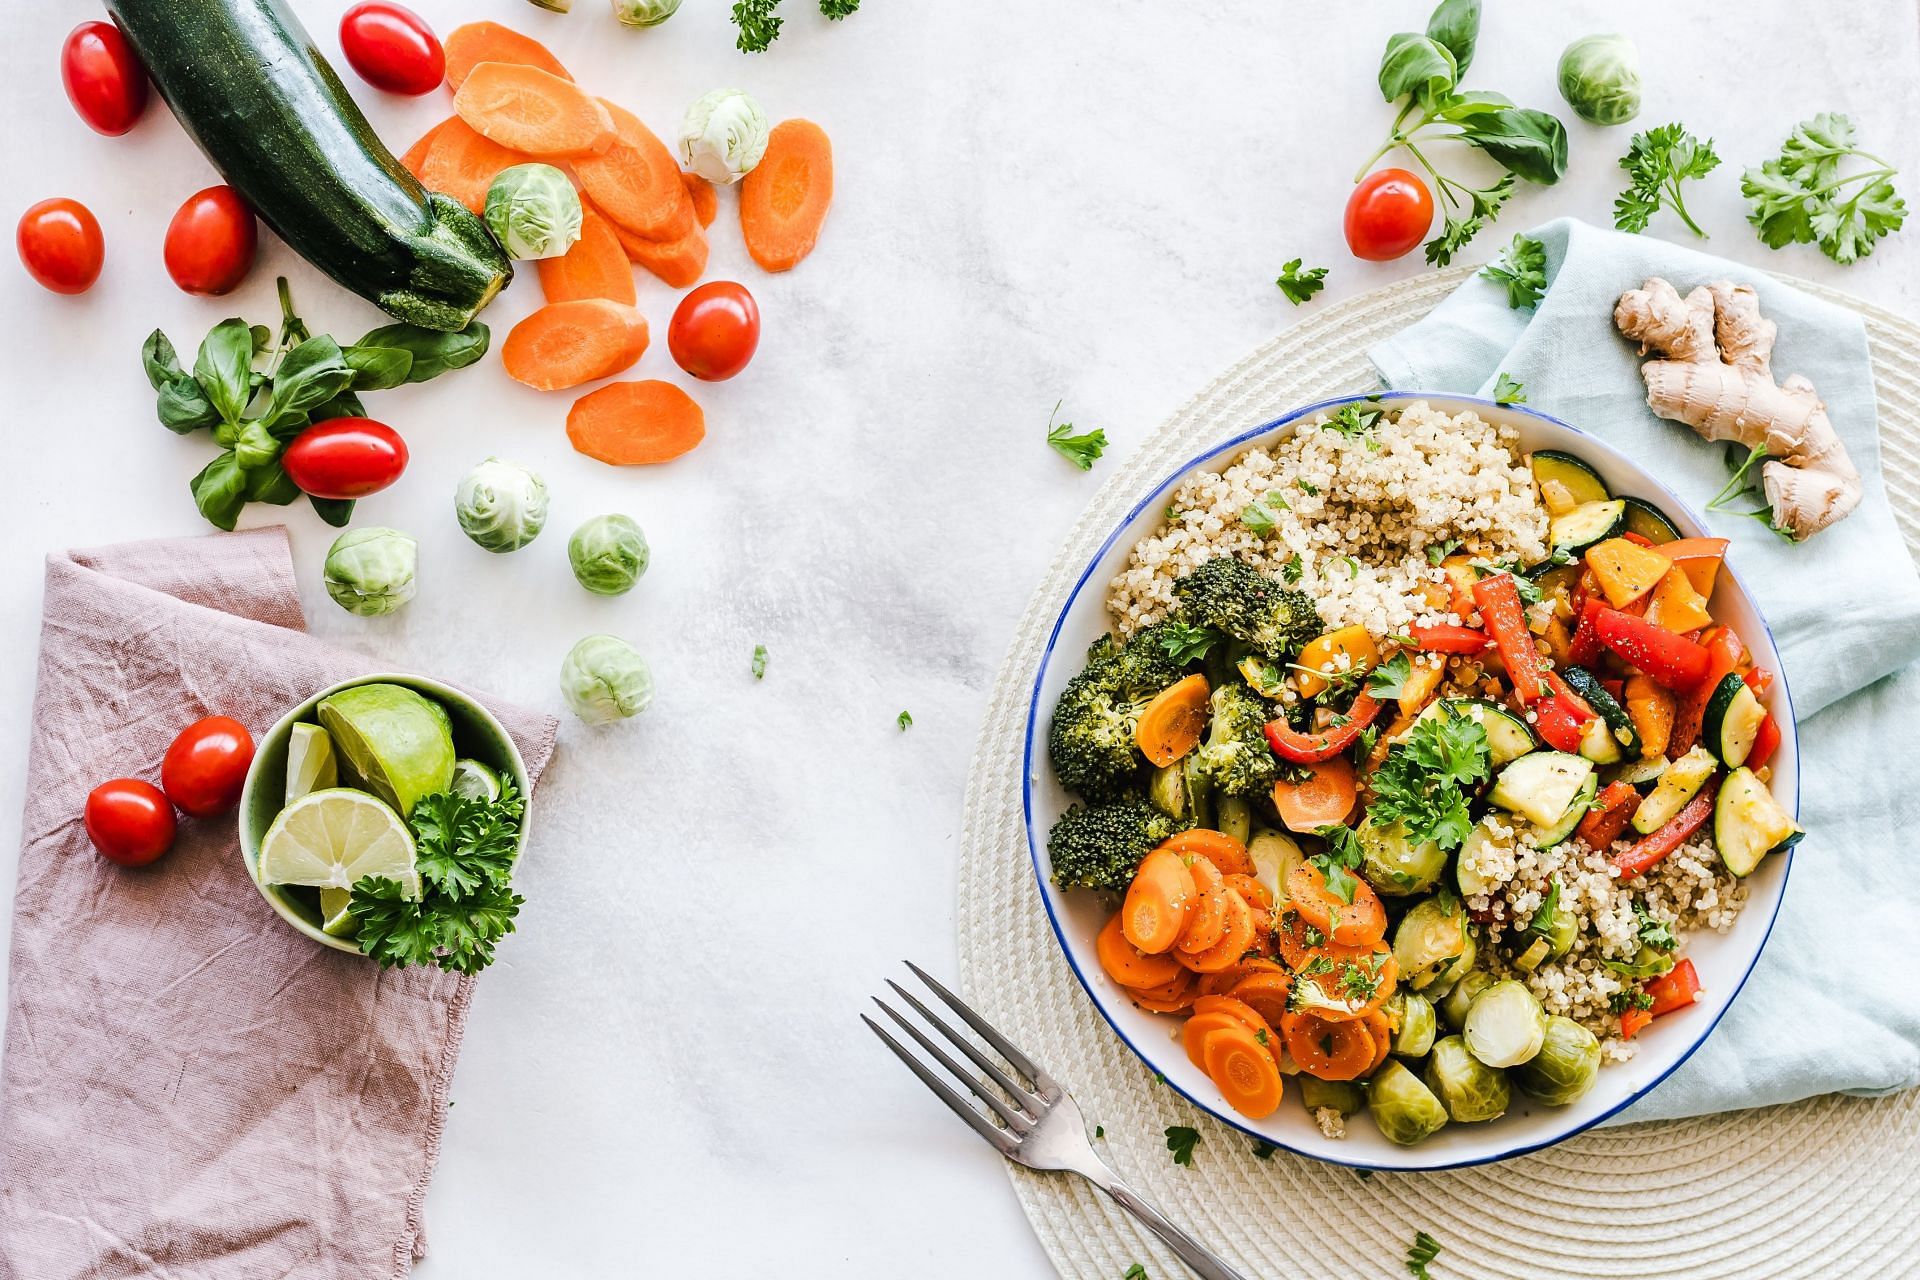 Include a wide variety of colourful fruits and veggies in your diet (Image via Pexels @Ella Olsson)